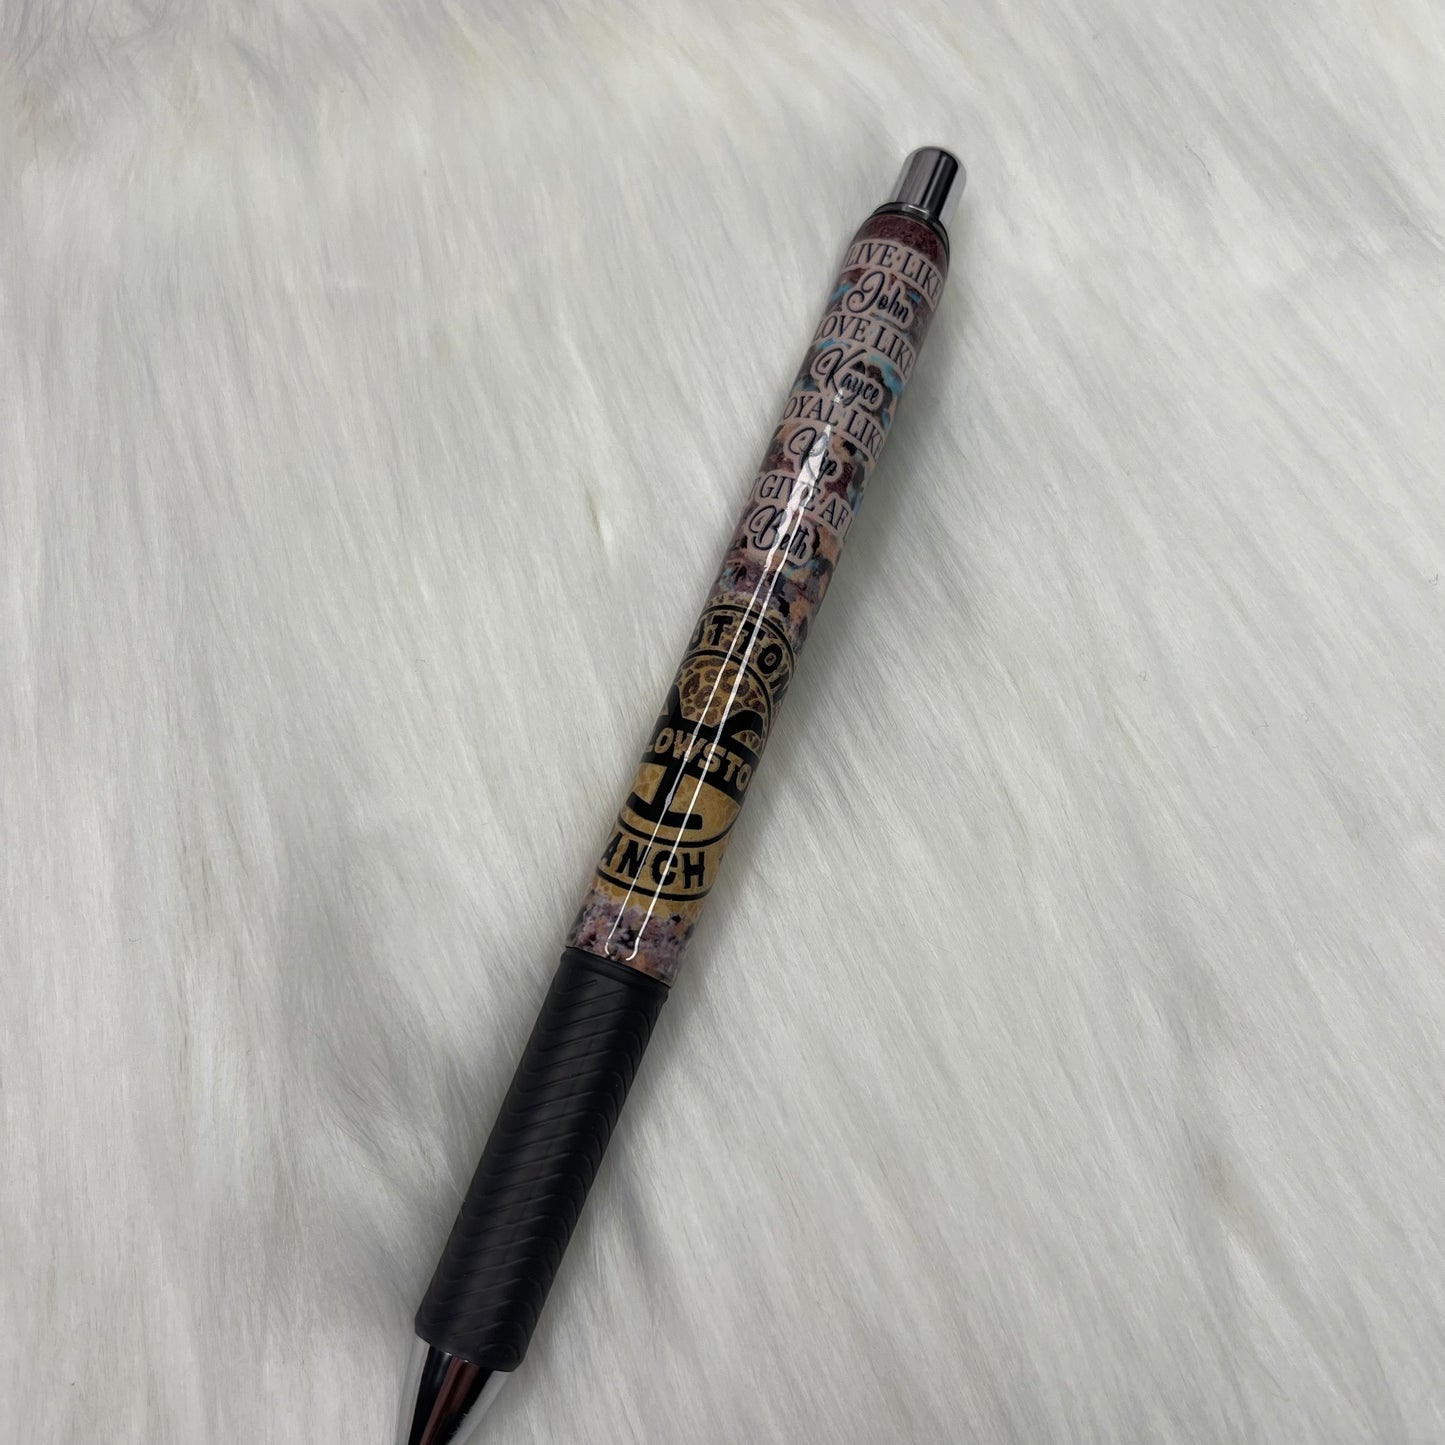 Yellowstone Print Wrapped Gel Pen with Grip & Clip